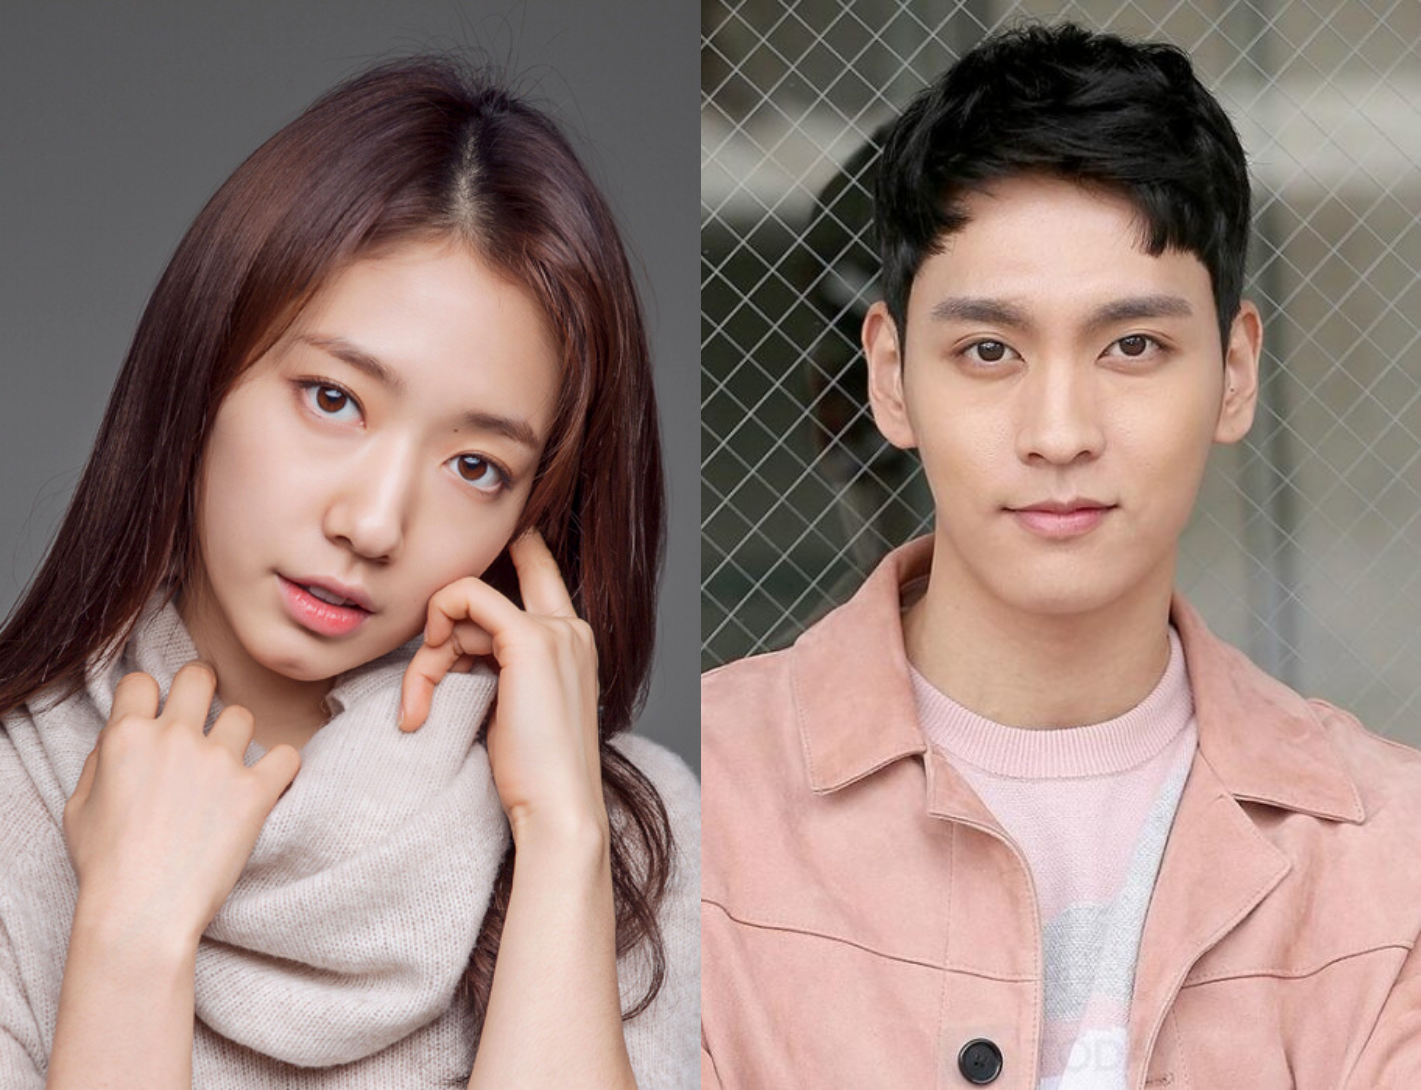 Korean actress Park Shin Hye made a surprise announcement of her marriage with Choi Tae-joon after a long relationship.